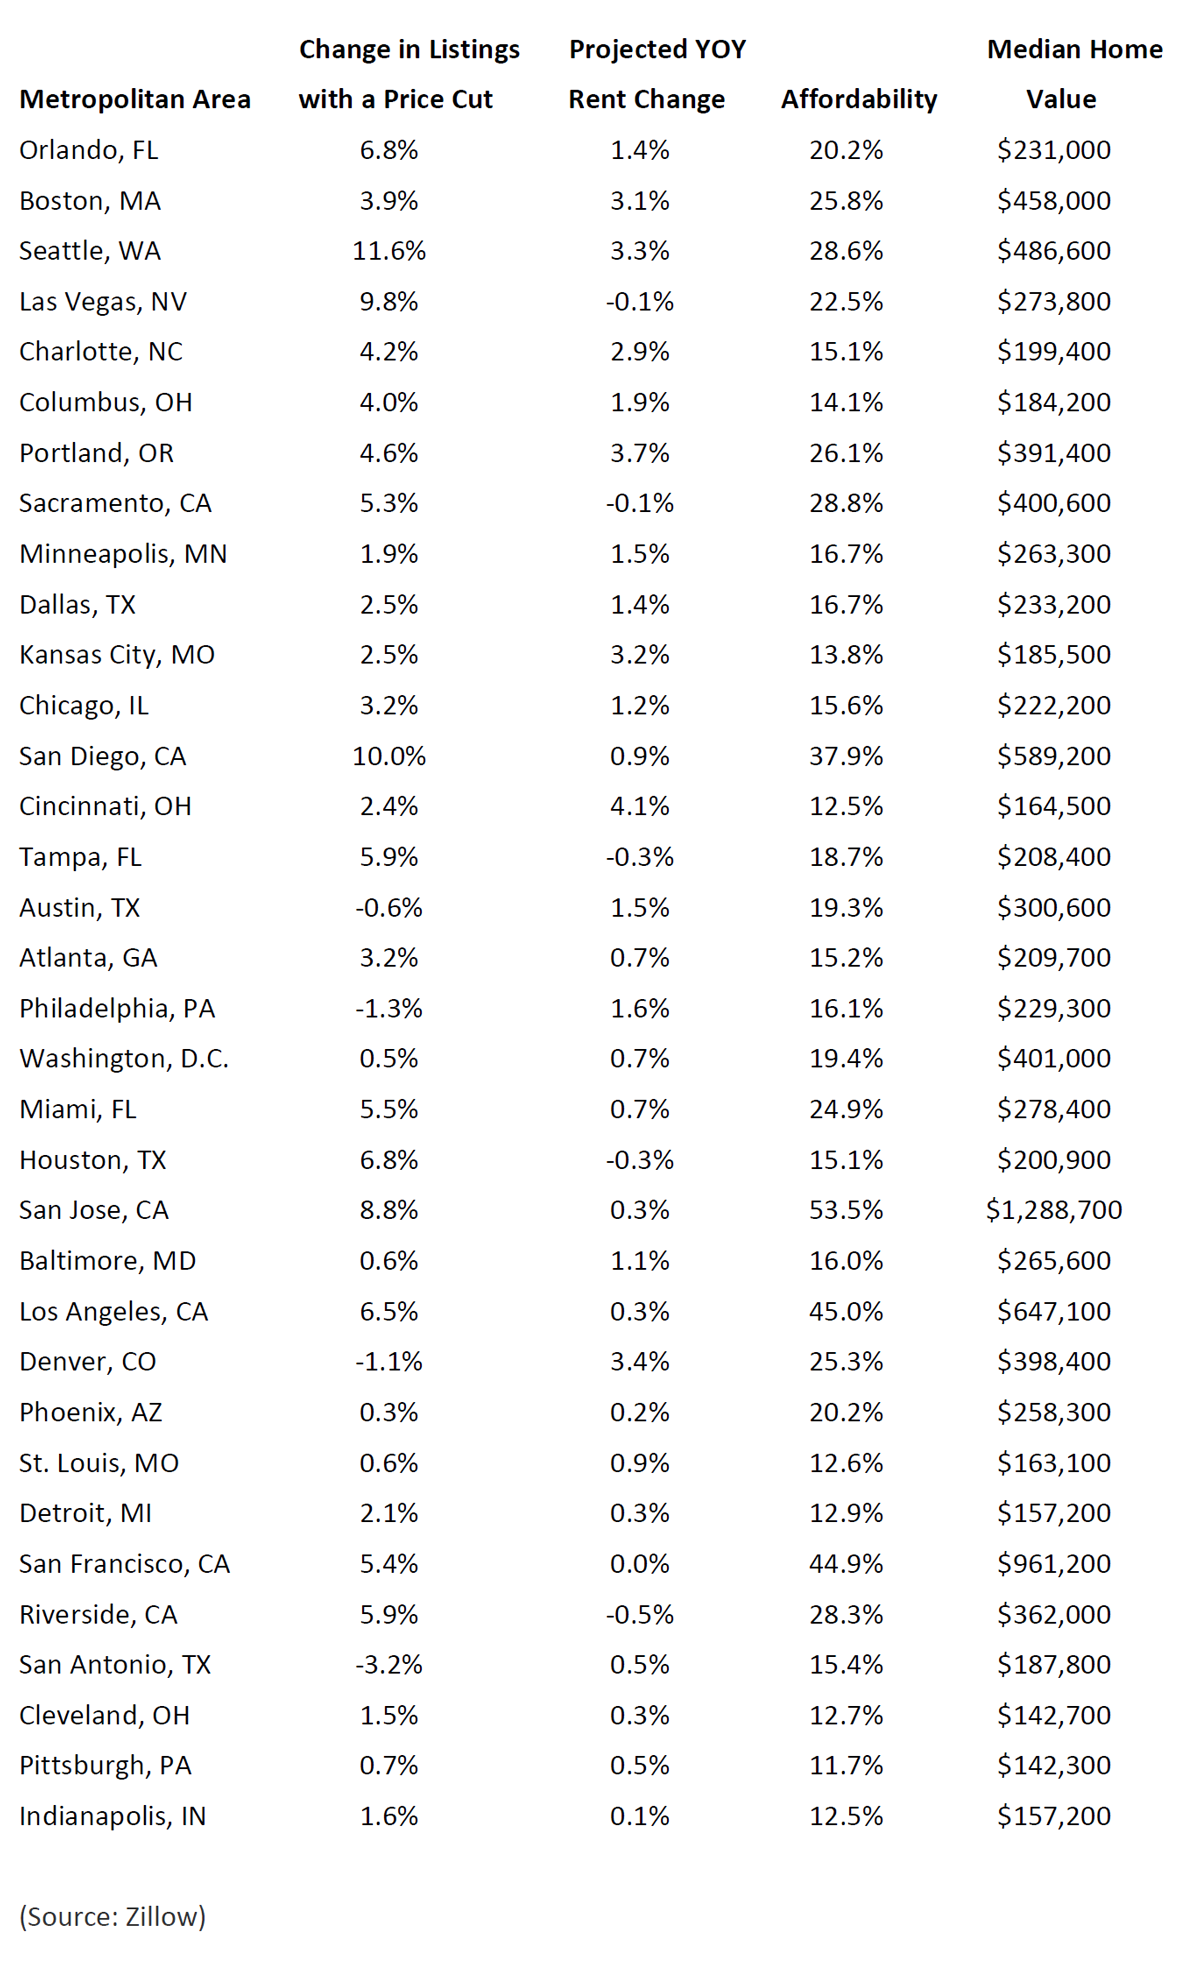 new-study-by-Zillow--october-2018.png